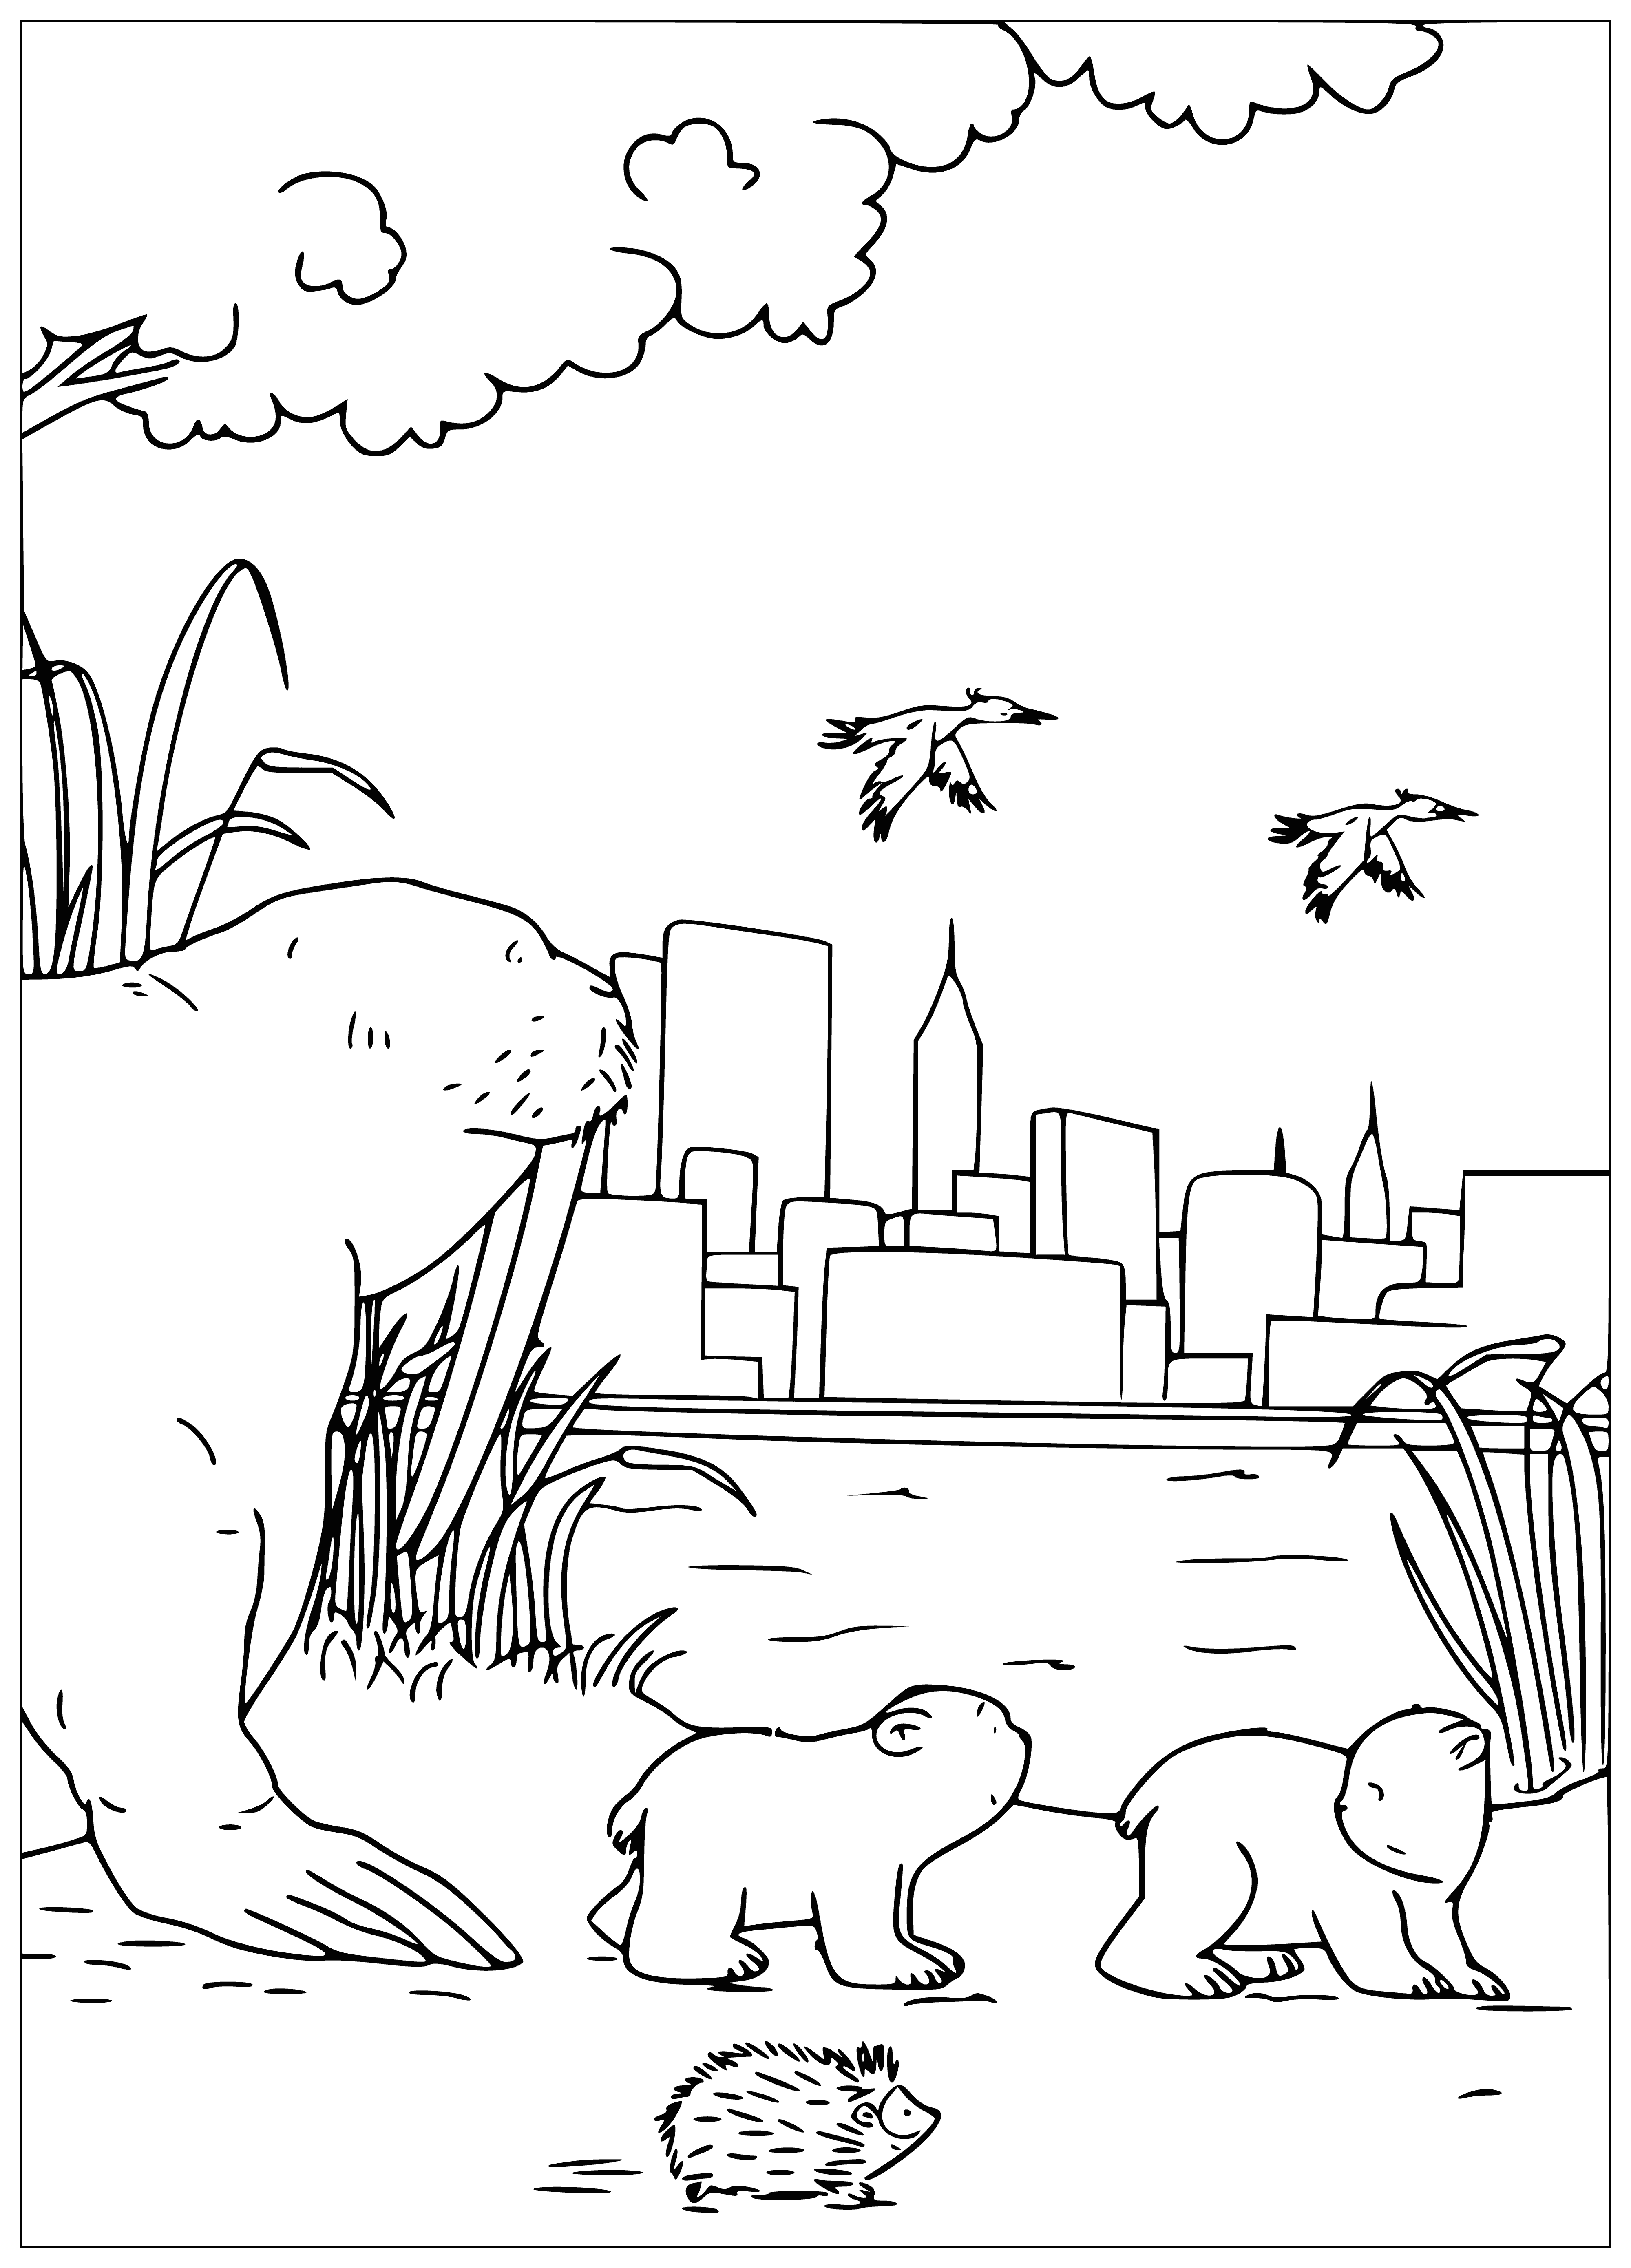 coloring page: Polar bear sees walrus and cubs on an ice floe, looking at it from the edge.